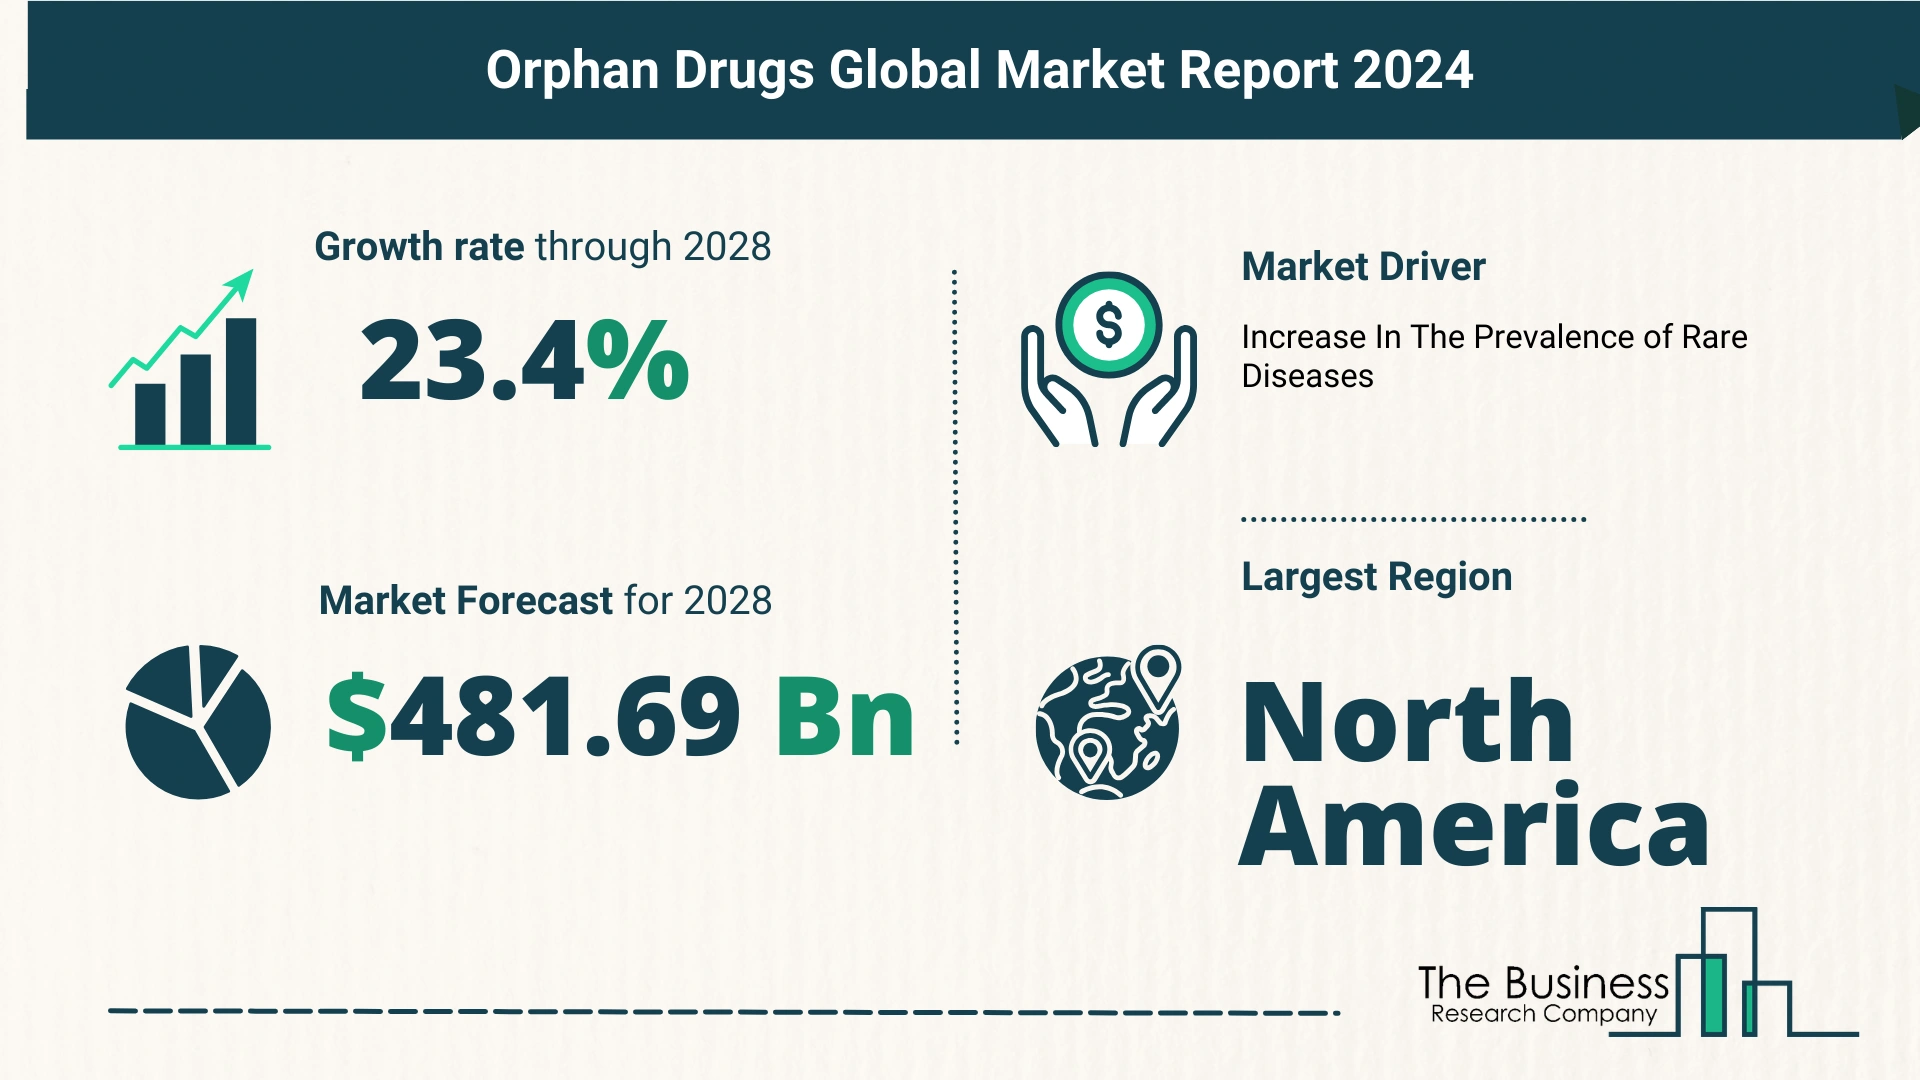 Key Takeaways From The Global Orphan Drugs Market Forecast 2024